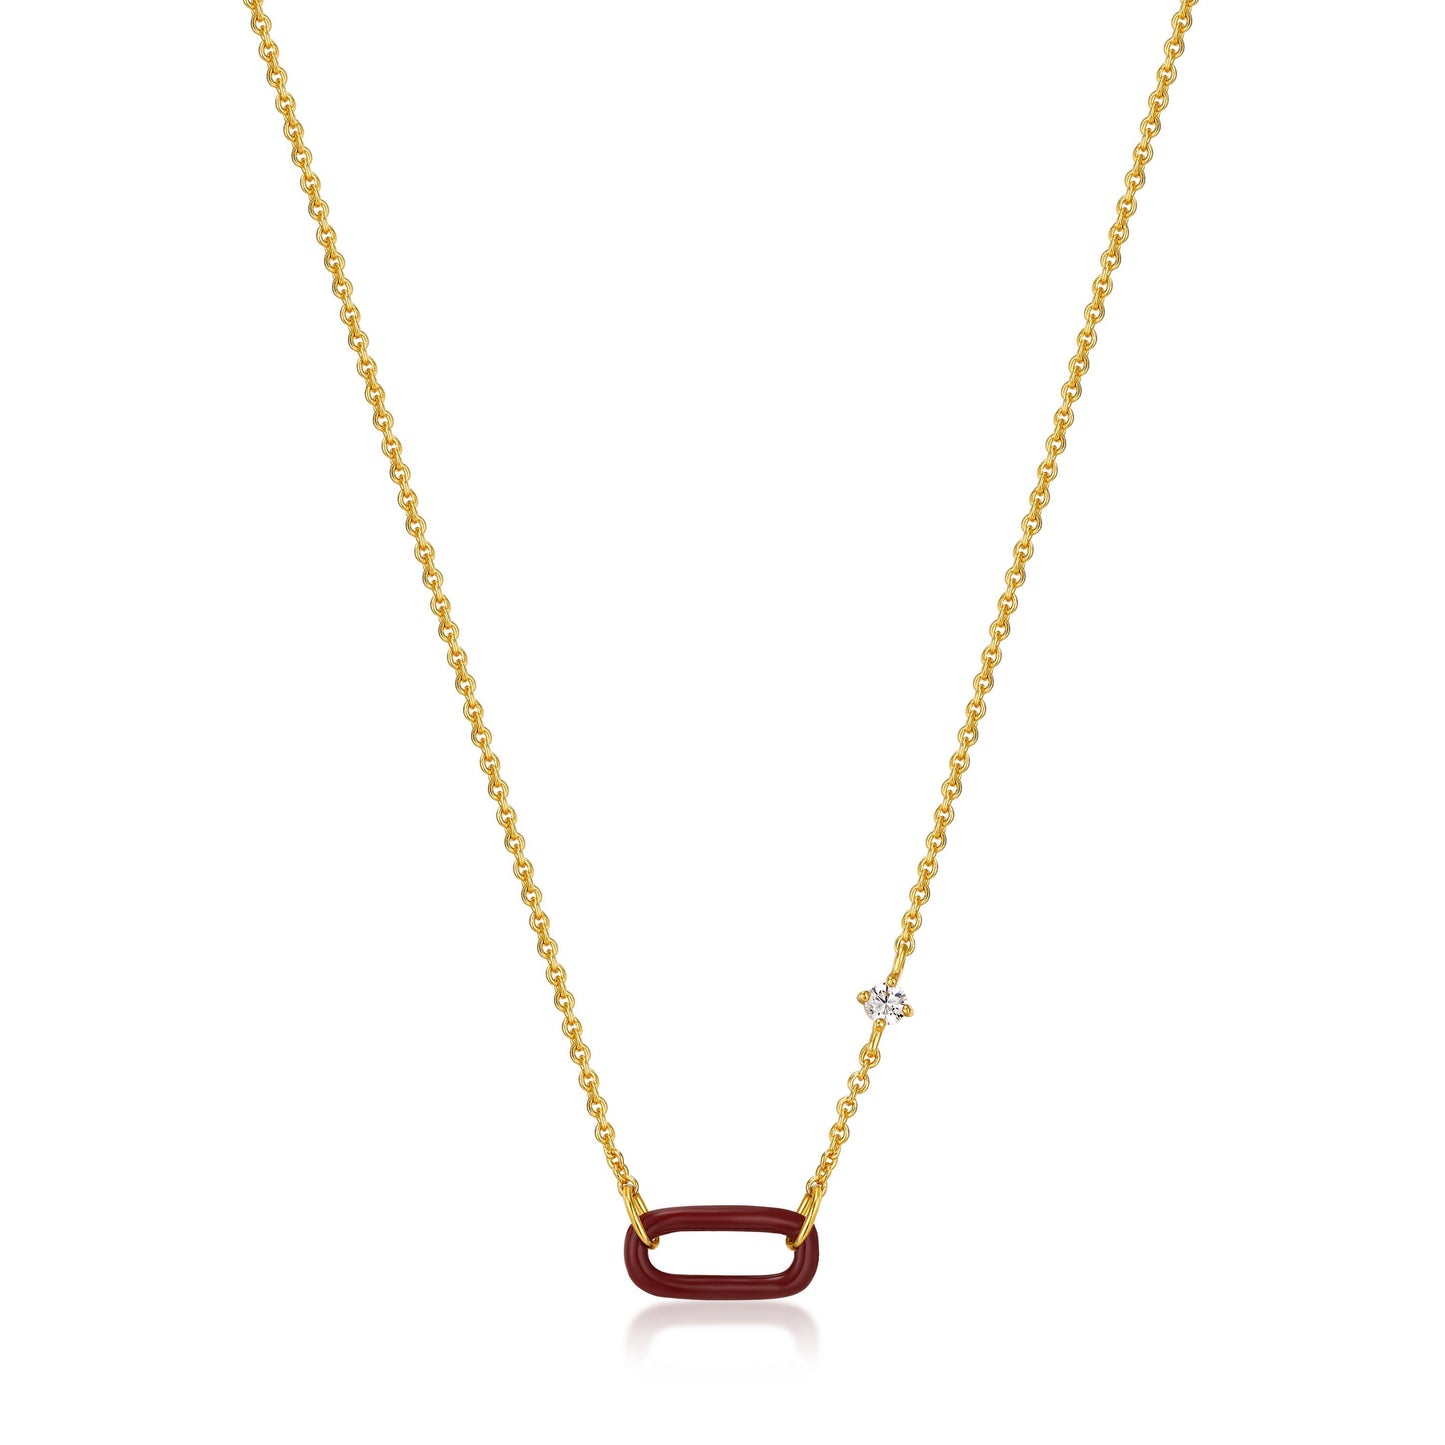 ANIA HAIE ANIA HAIE - Claret Red Enamel Gold Link Necklace available at The Good Life Boutique